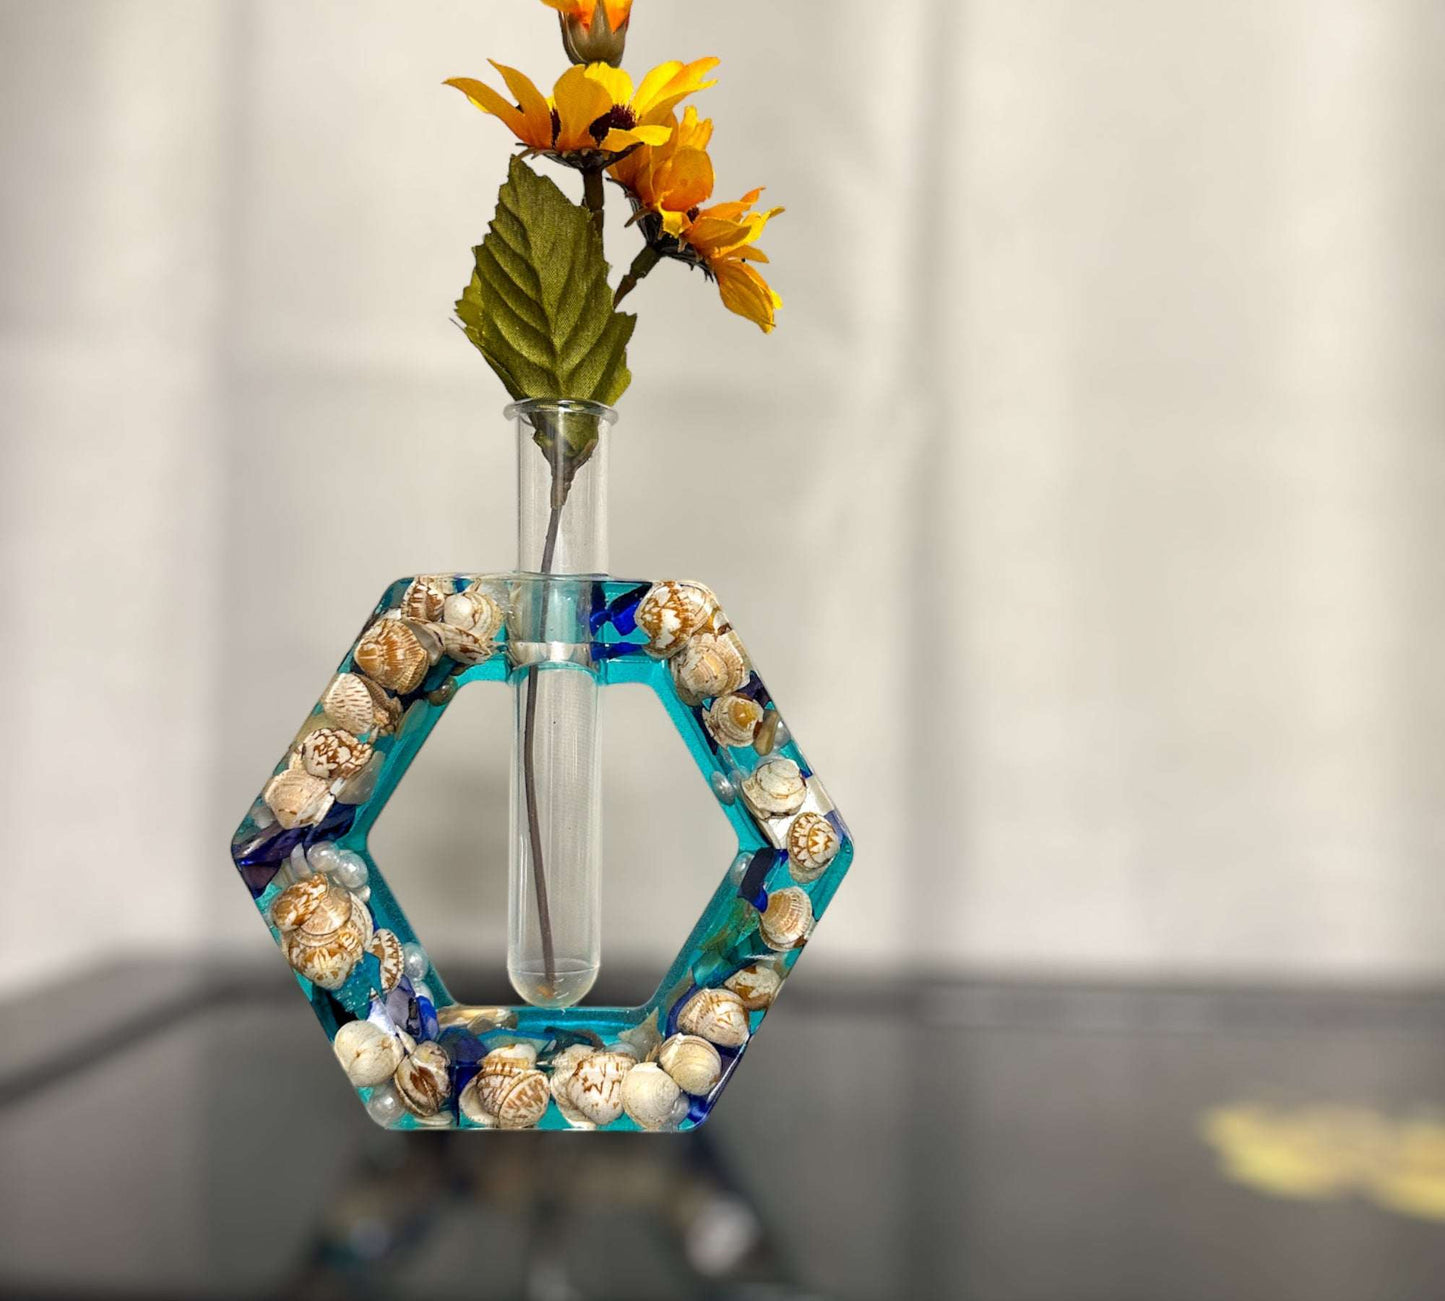 A hexagon shaped propergation bud vase created with Epoxy Resin. The first layer is filled with real seashells, the background layer is a bright teal blue. Comes with a test tube that will hold your favourite flower or plant you wish to start and root